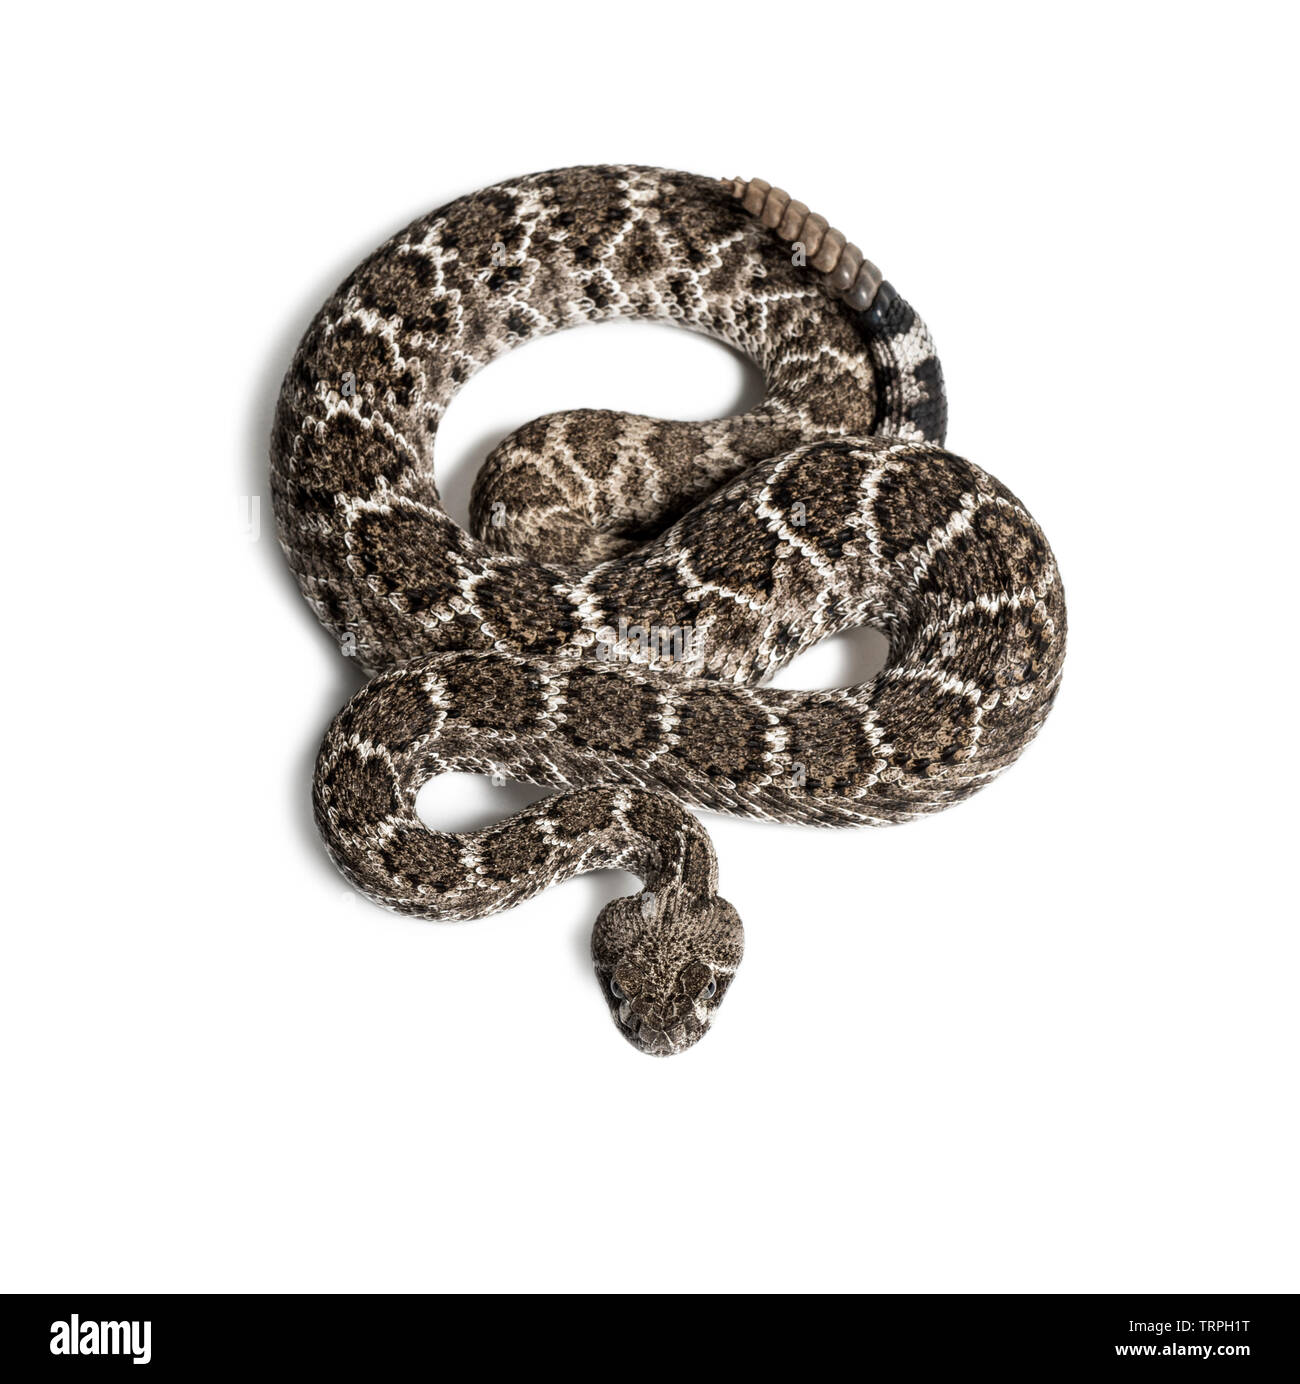 Diamondback snake Cut Out Stock Images & Pictures - Alamy